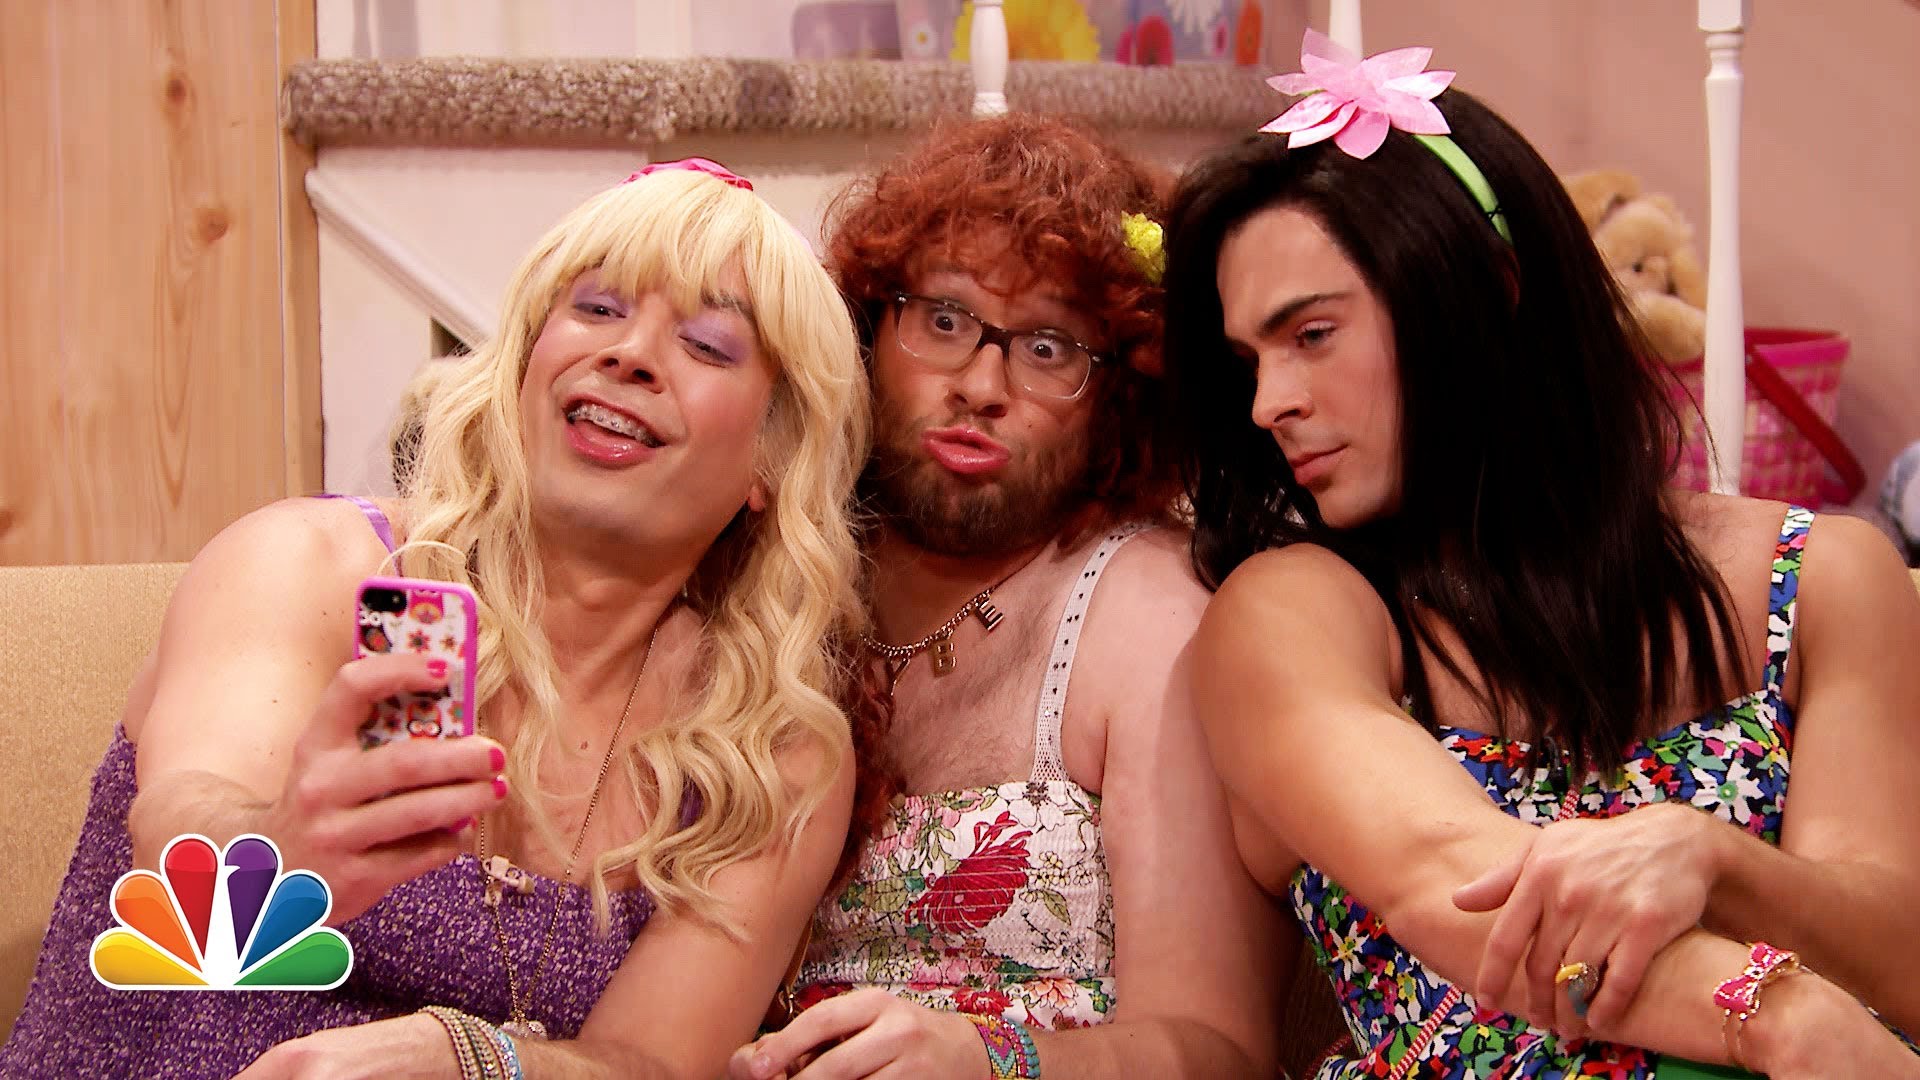 Omg Ew Jimmy Fallon Drags It Up On Teen Nick Show With Seth Rogen And Zac Efron Omg Blog